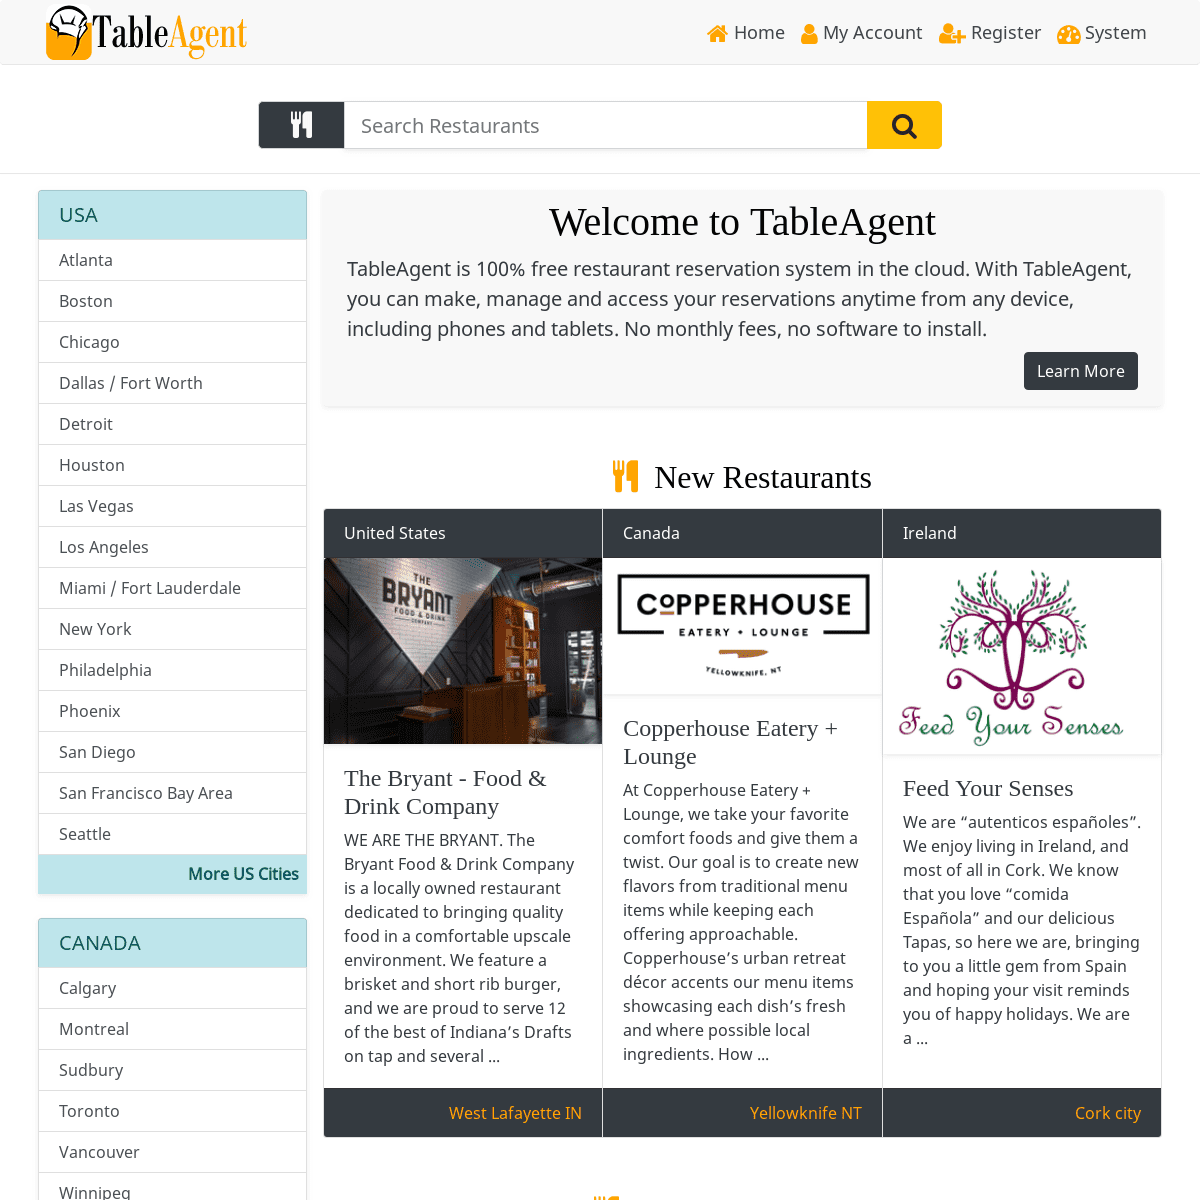 A complete backup of tableagent.com